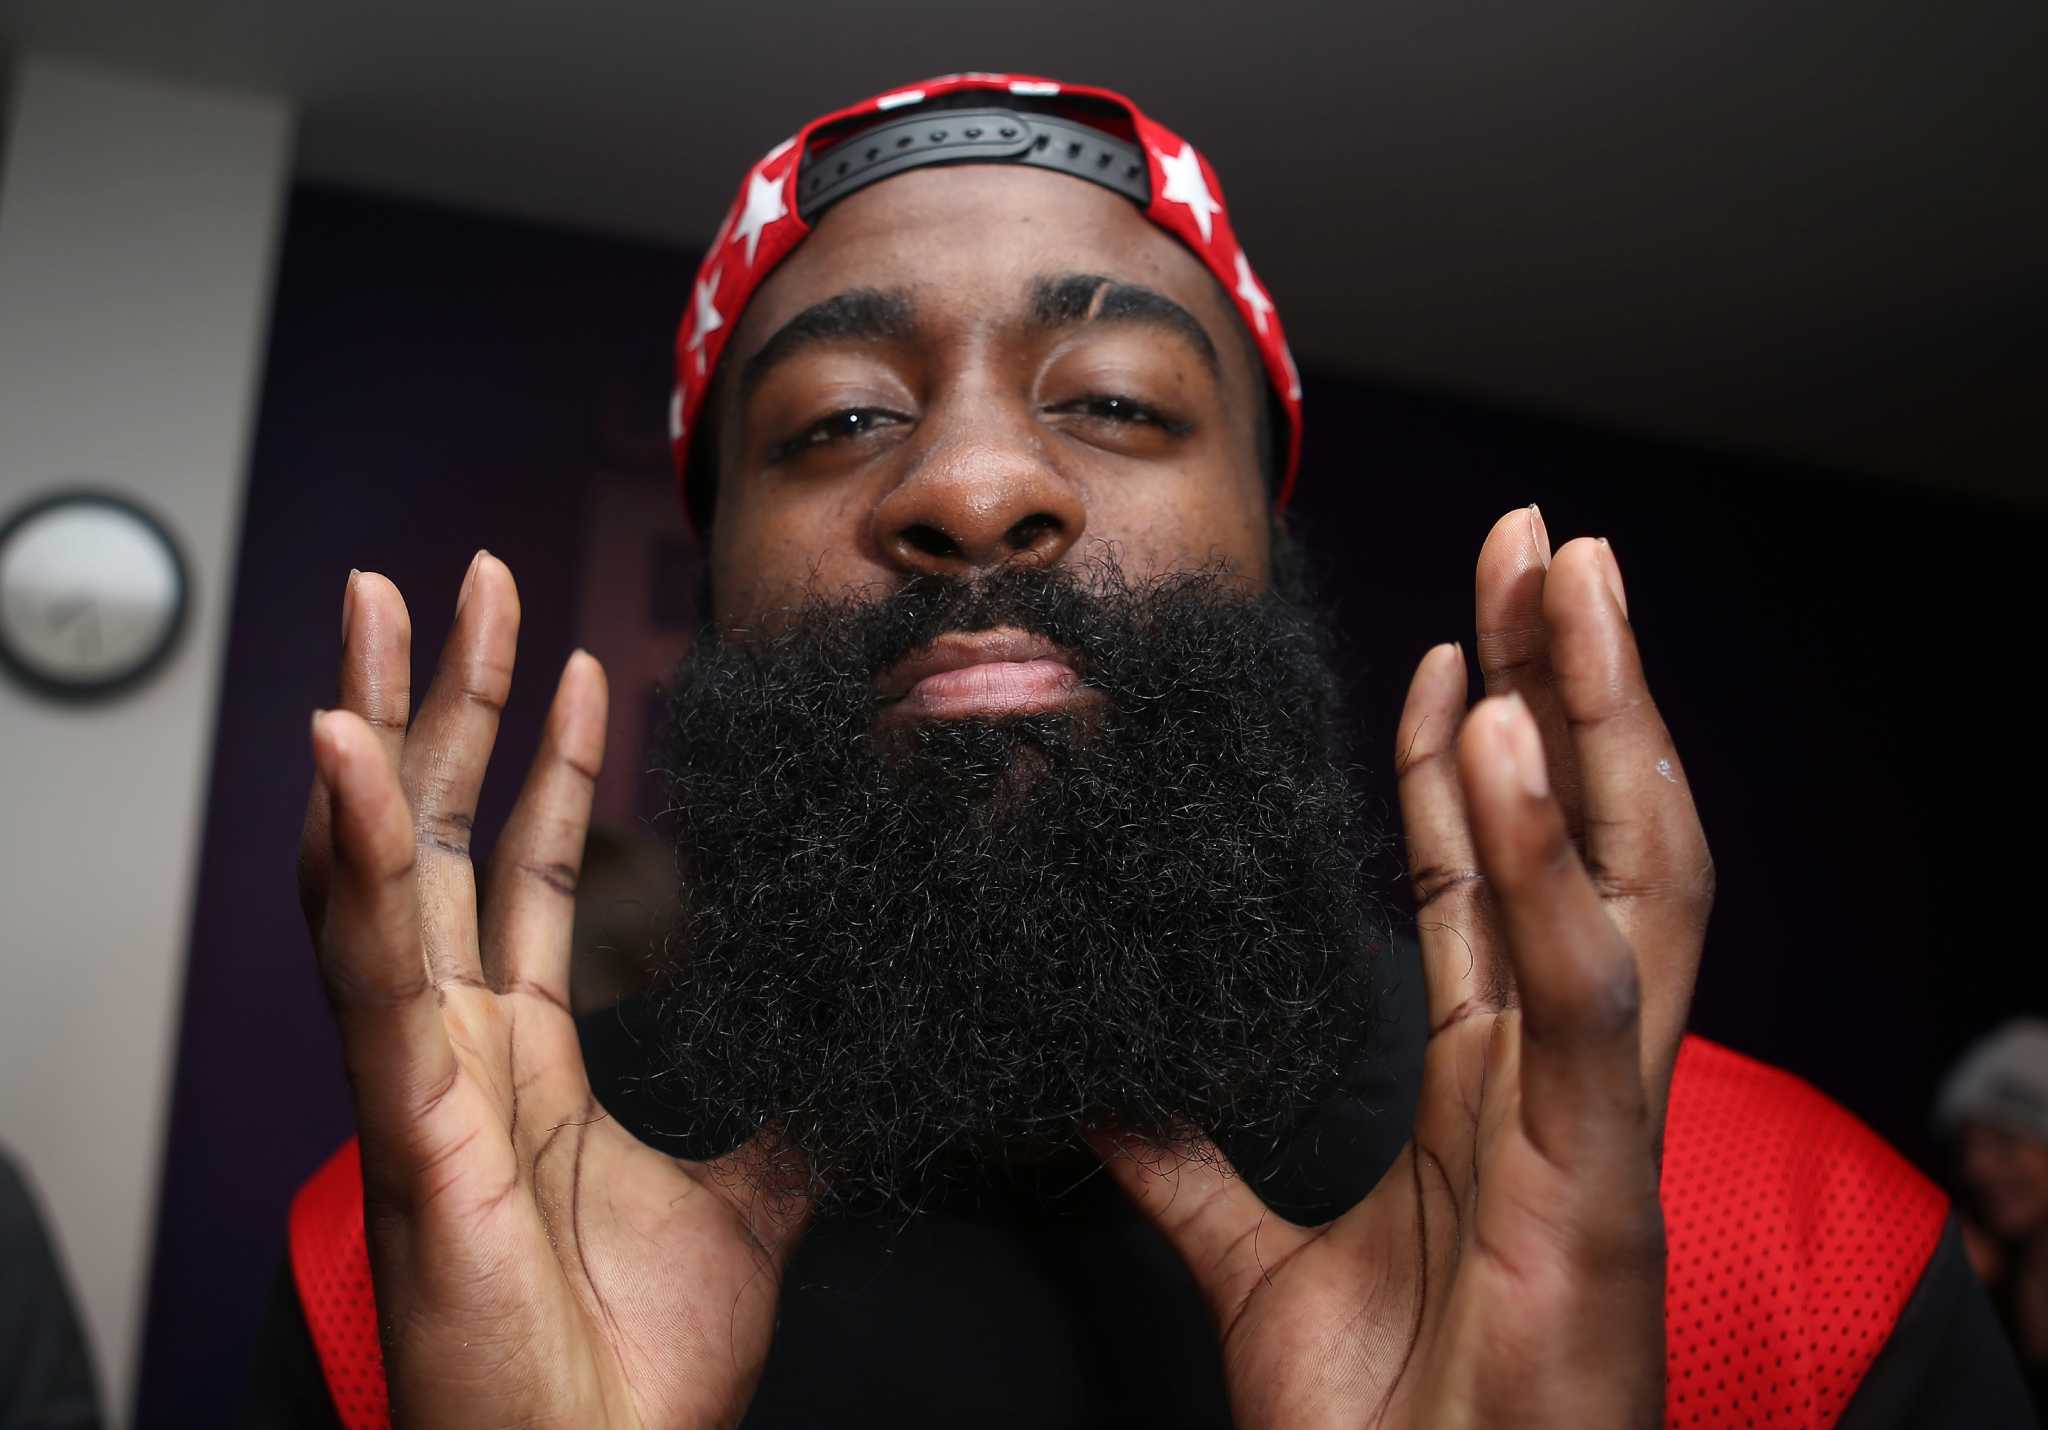 An oral history of how James Harden grew The Beard - The Athletic